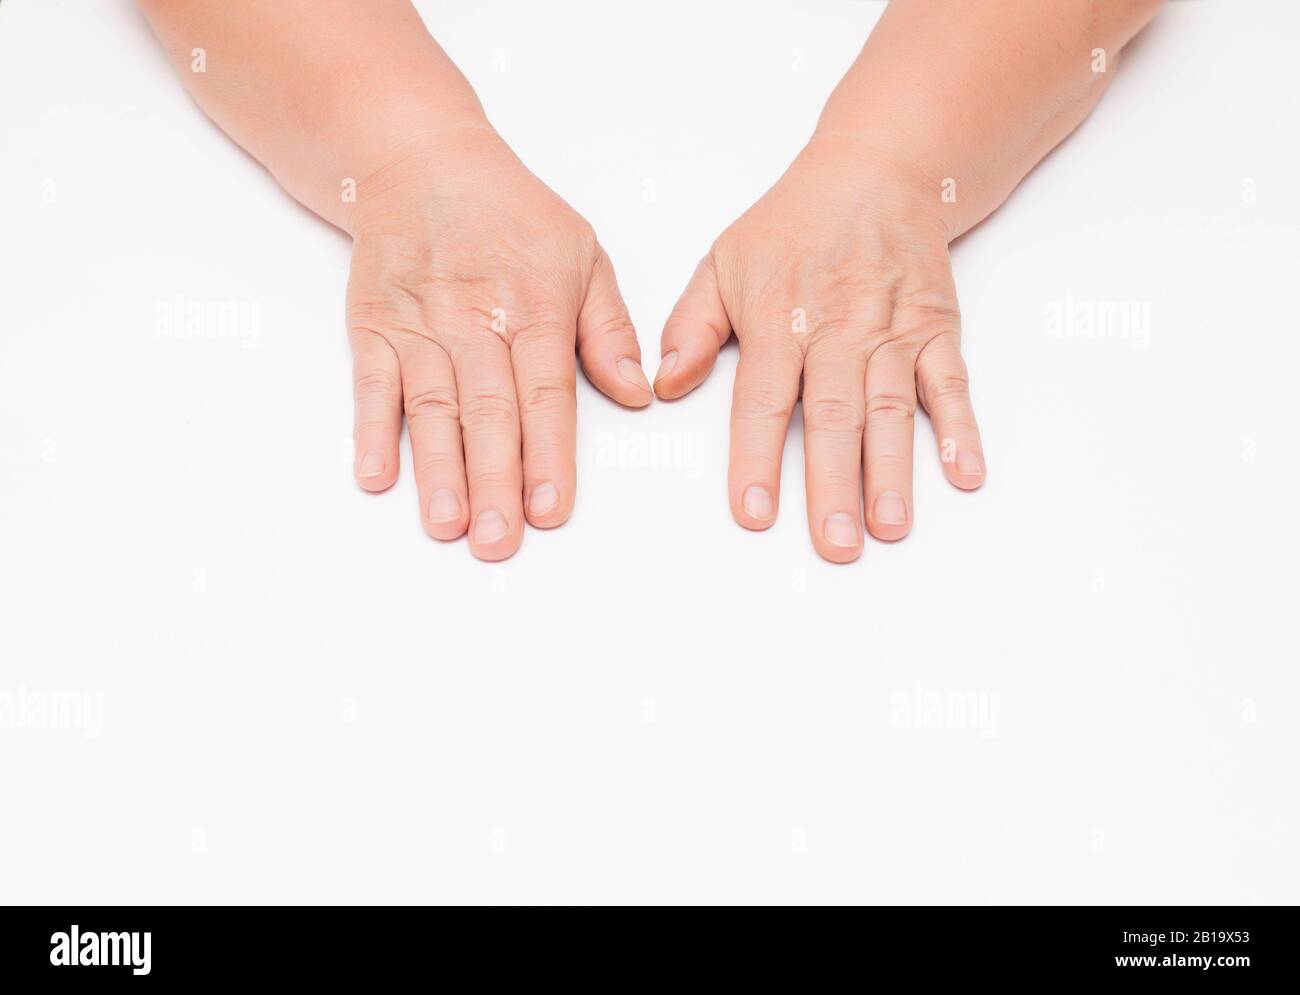 Dry skin with wrinkles on the hands of an elderly woman, white background, isolate. Fragility of blood vessels, vitamin deficiency Stock Photo